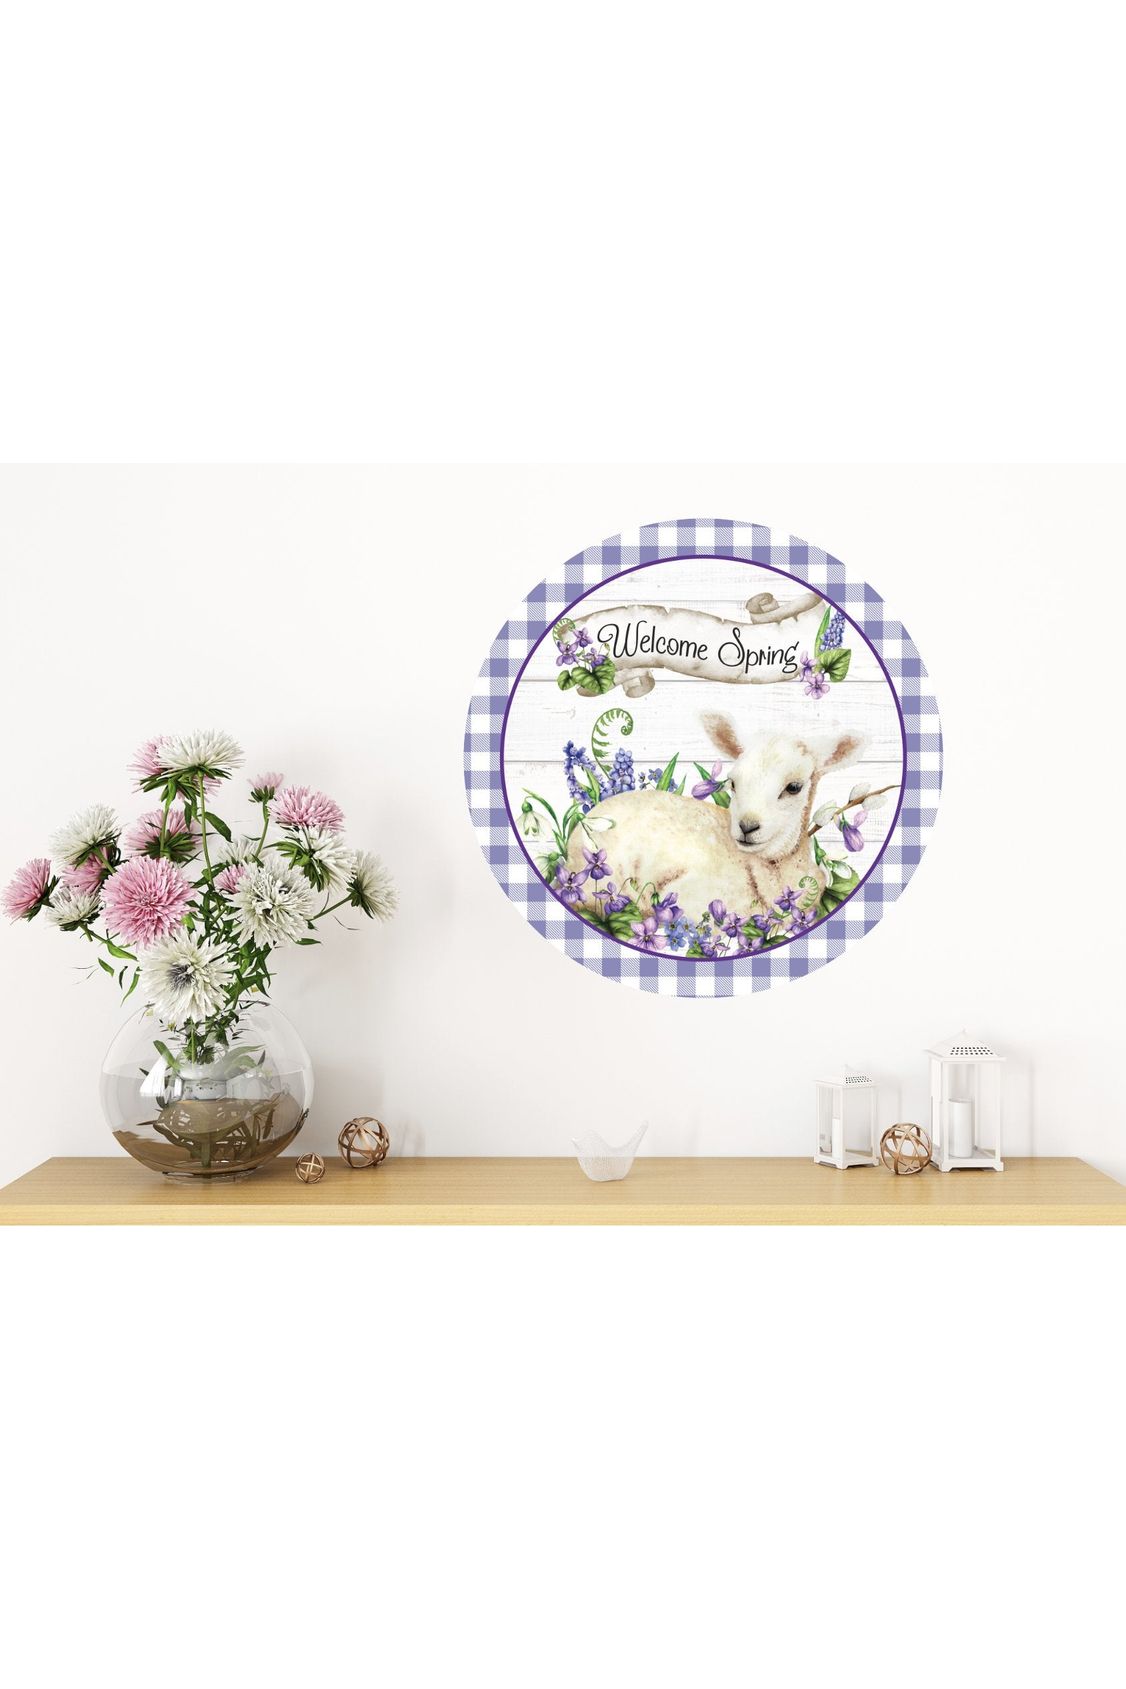 Welcome Spring Lamb Sign - Wreath Enhancement - Michelle's aDOORable Creations - Signature Signs